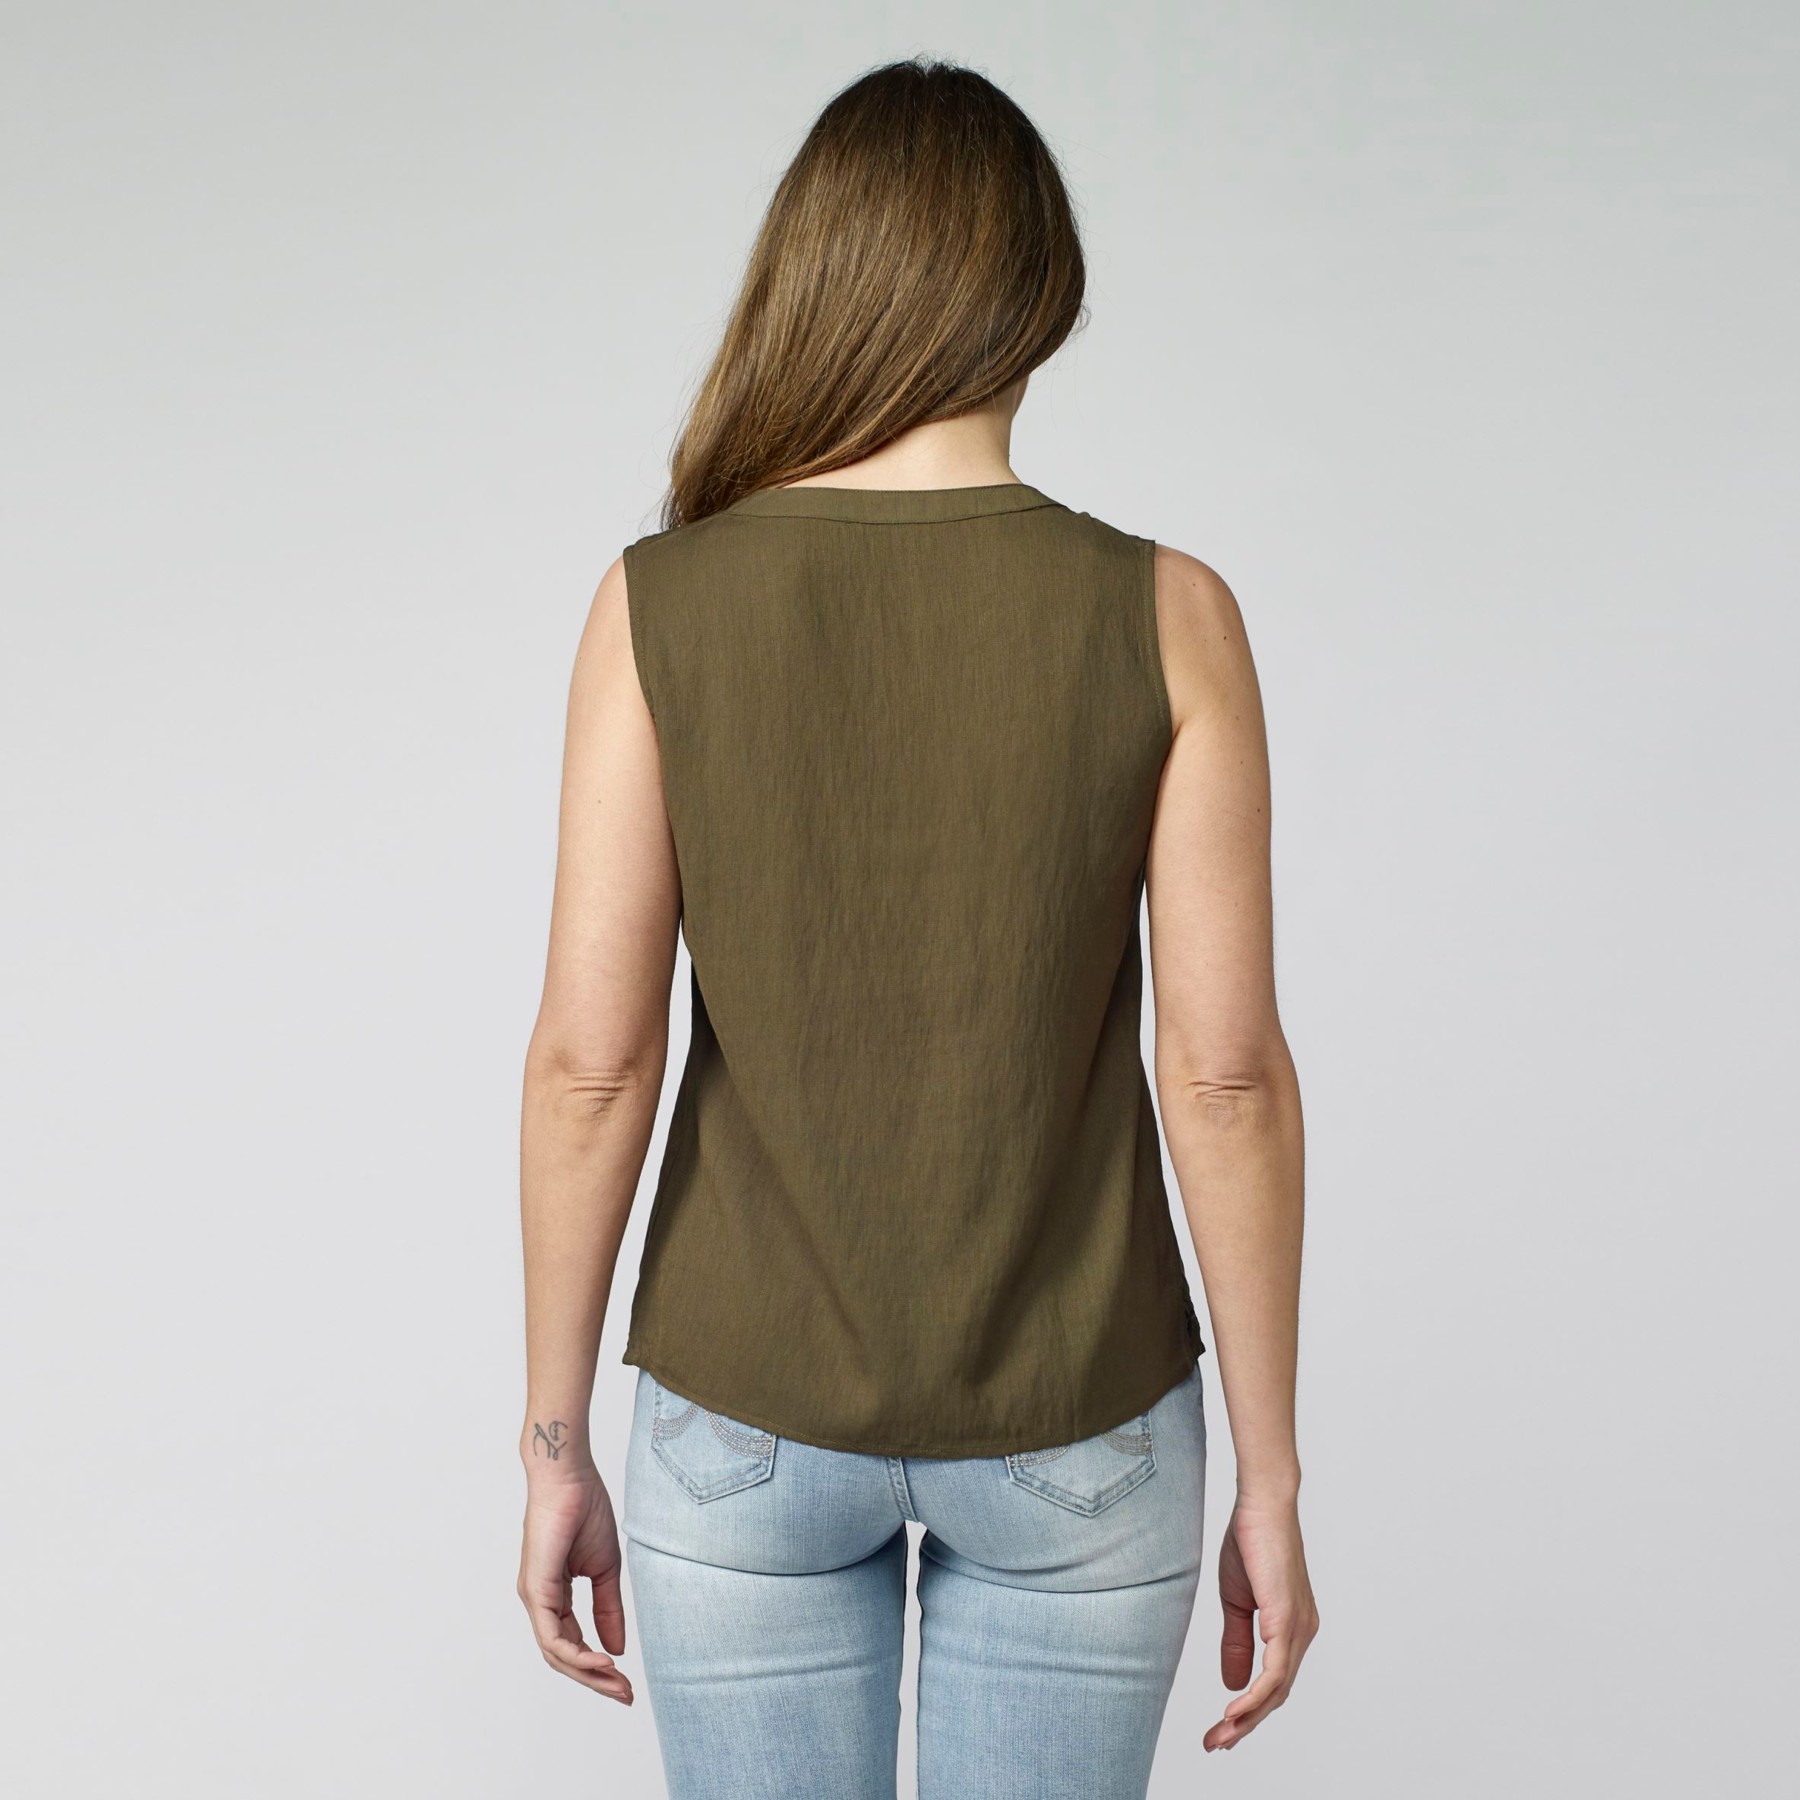 Flowing Blouse with V-neckline, Sleeveless with Embroidered Detail and Lace on the Front in Khaki Color for Women 5